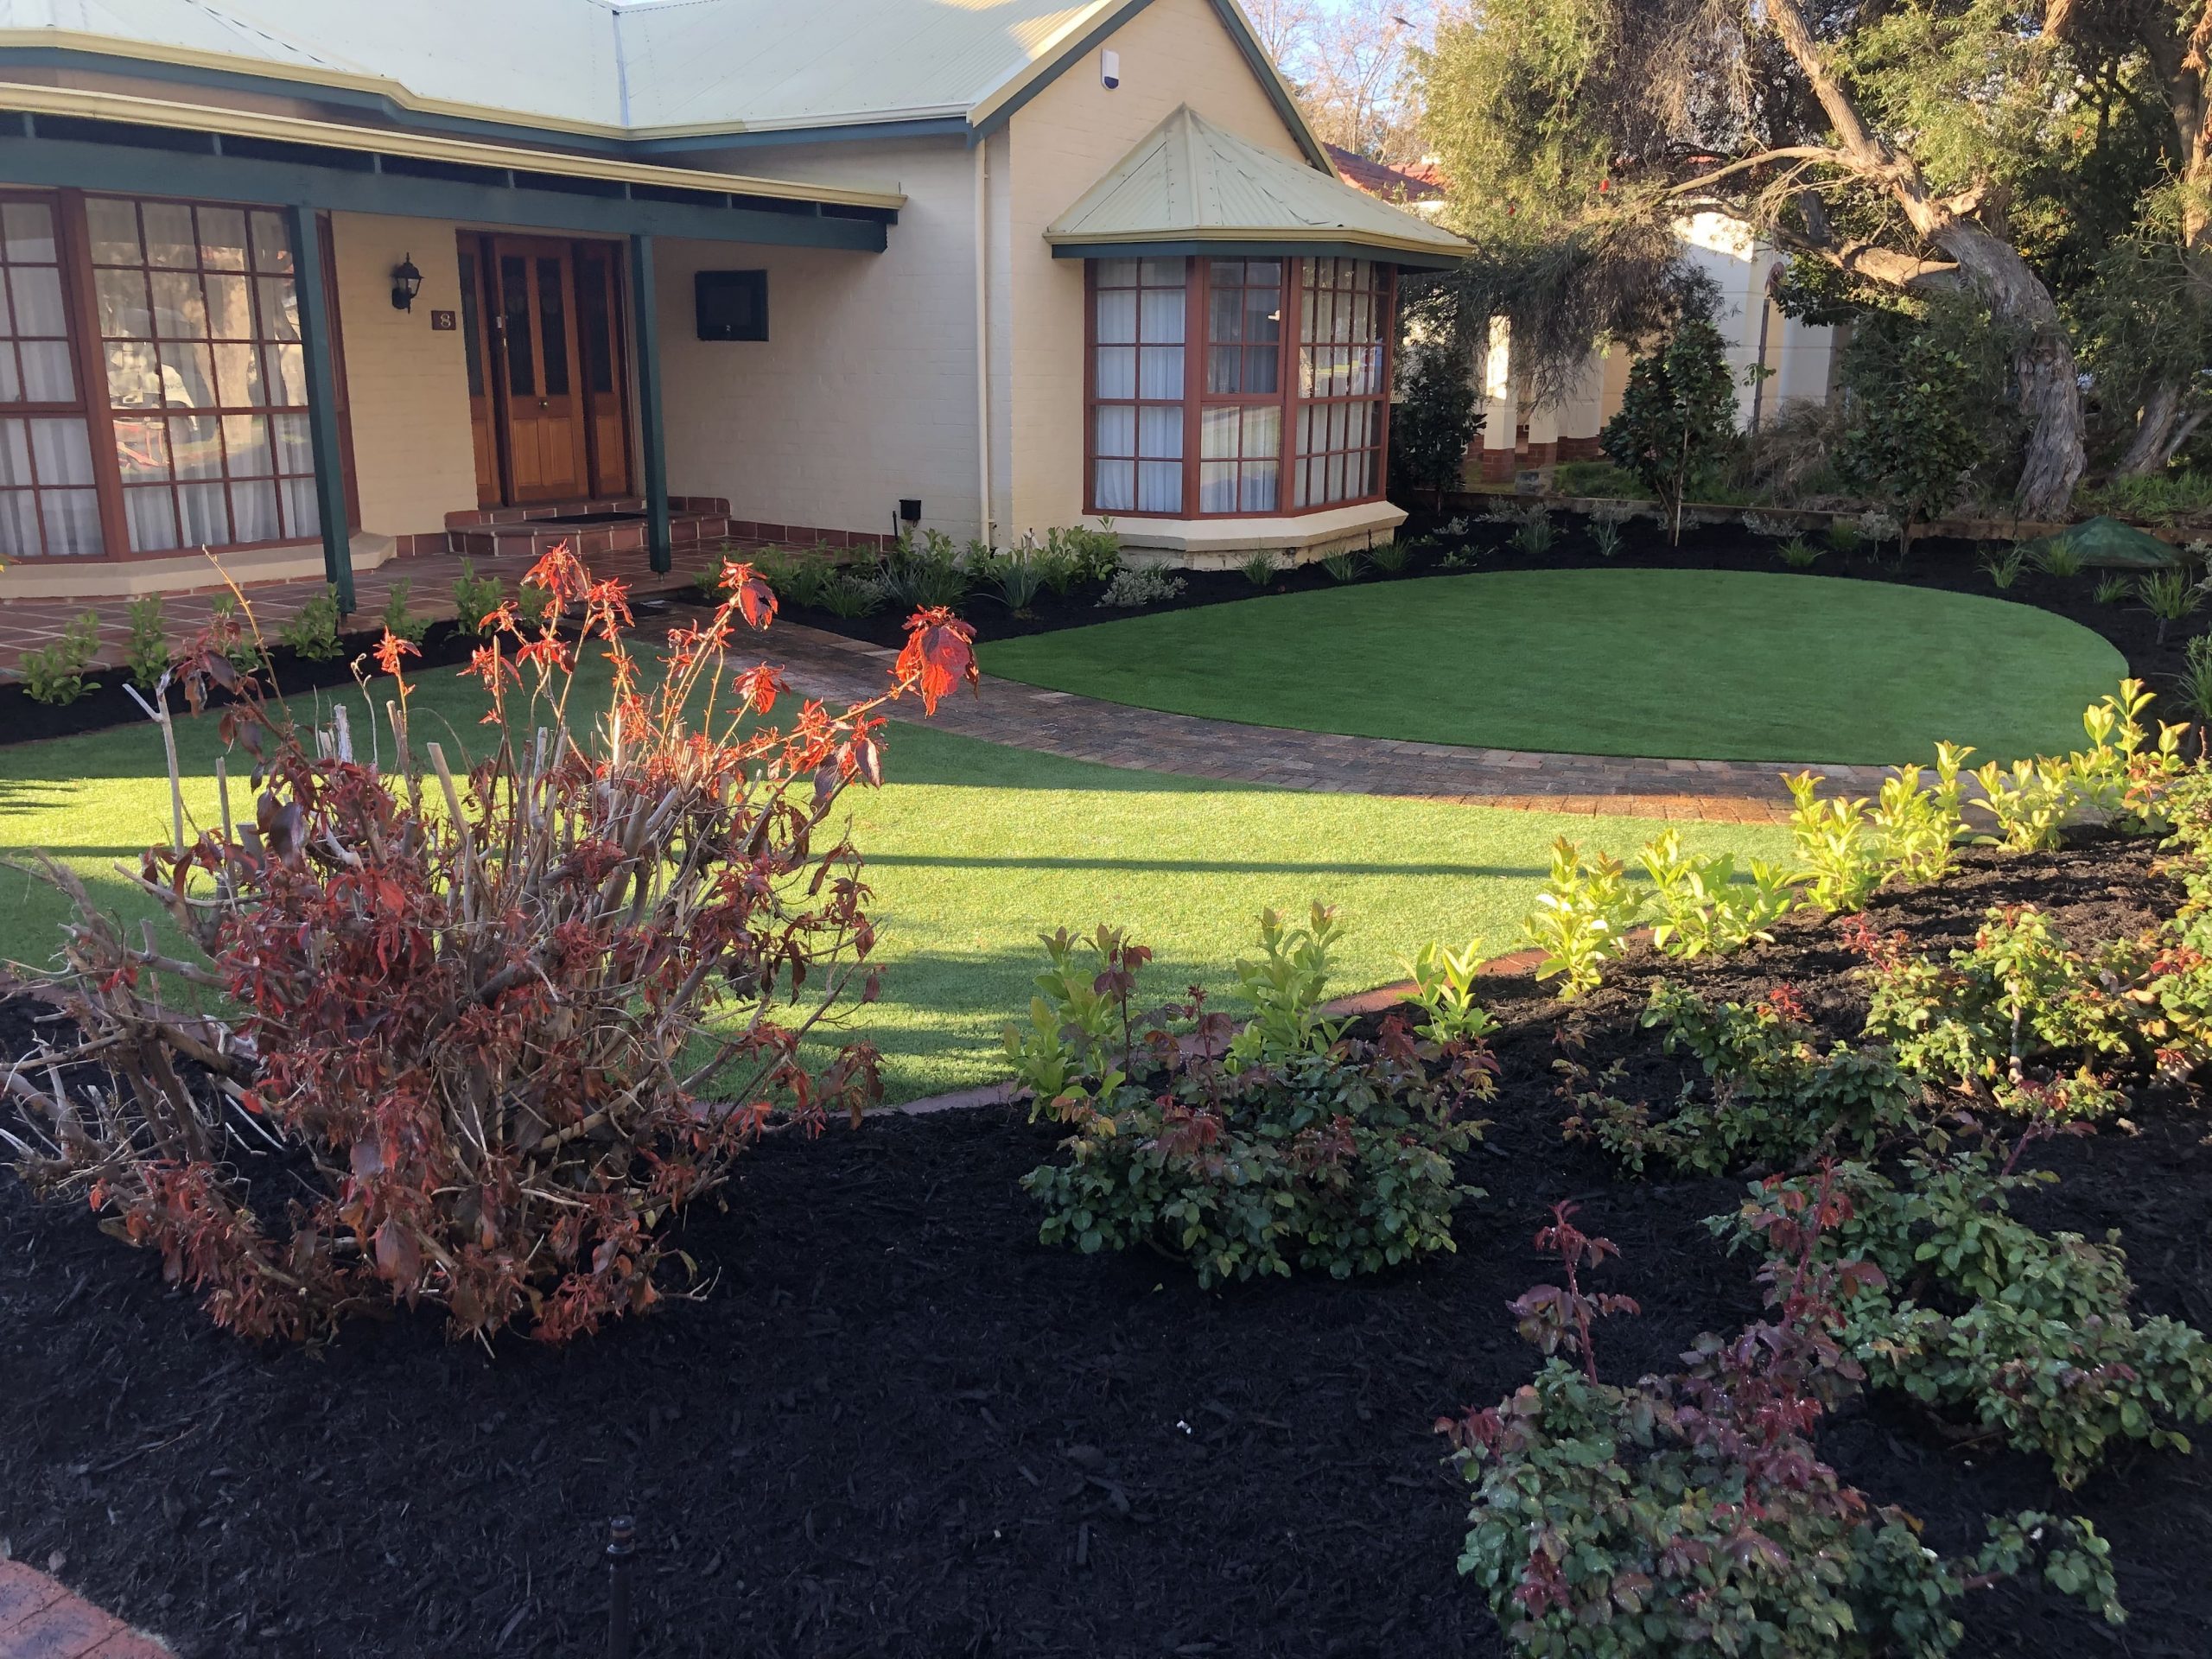 Applecross Rennovation Project for the Irrigation and Reticulation